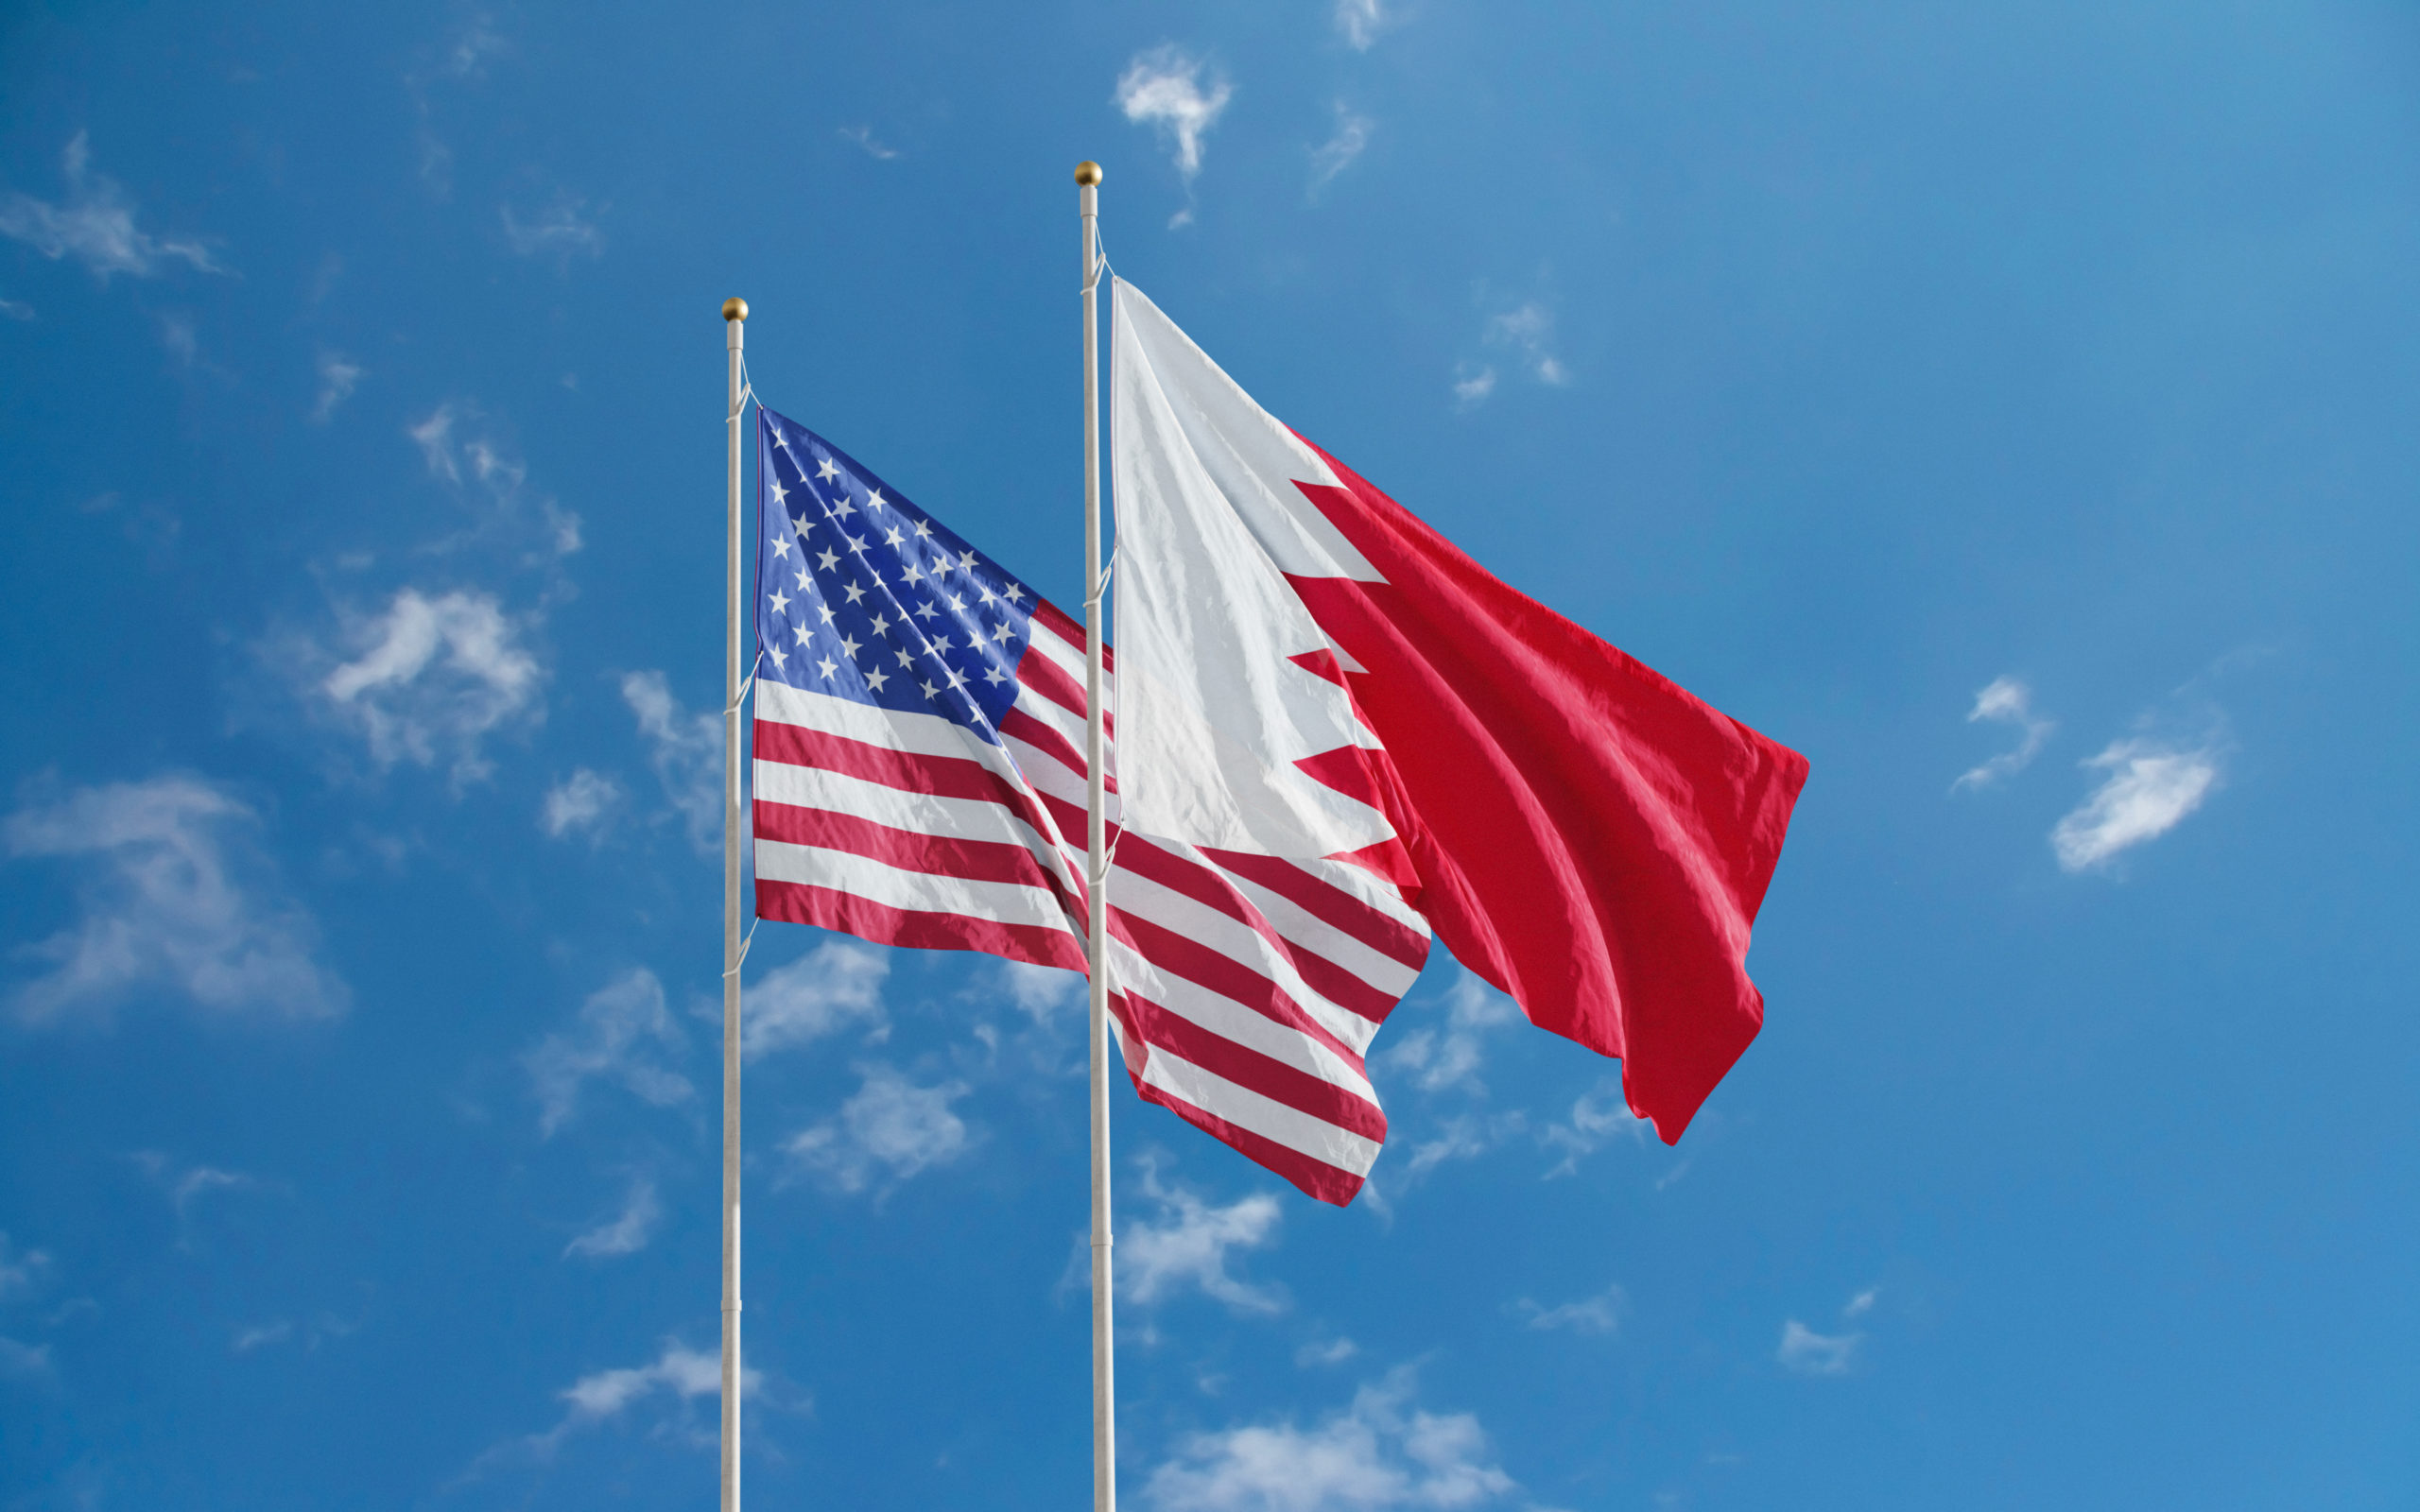 US Flag and Bahraini Flag Flying Next to Each Other